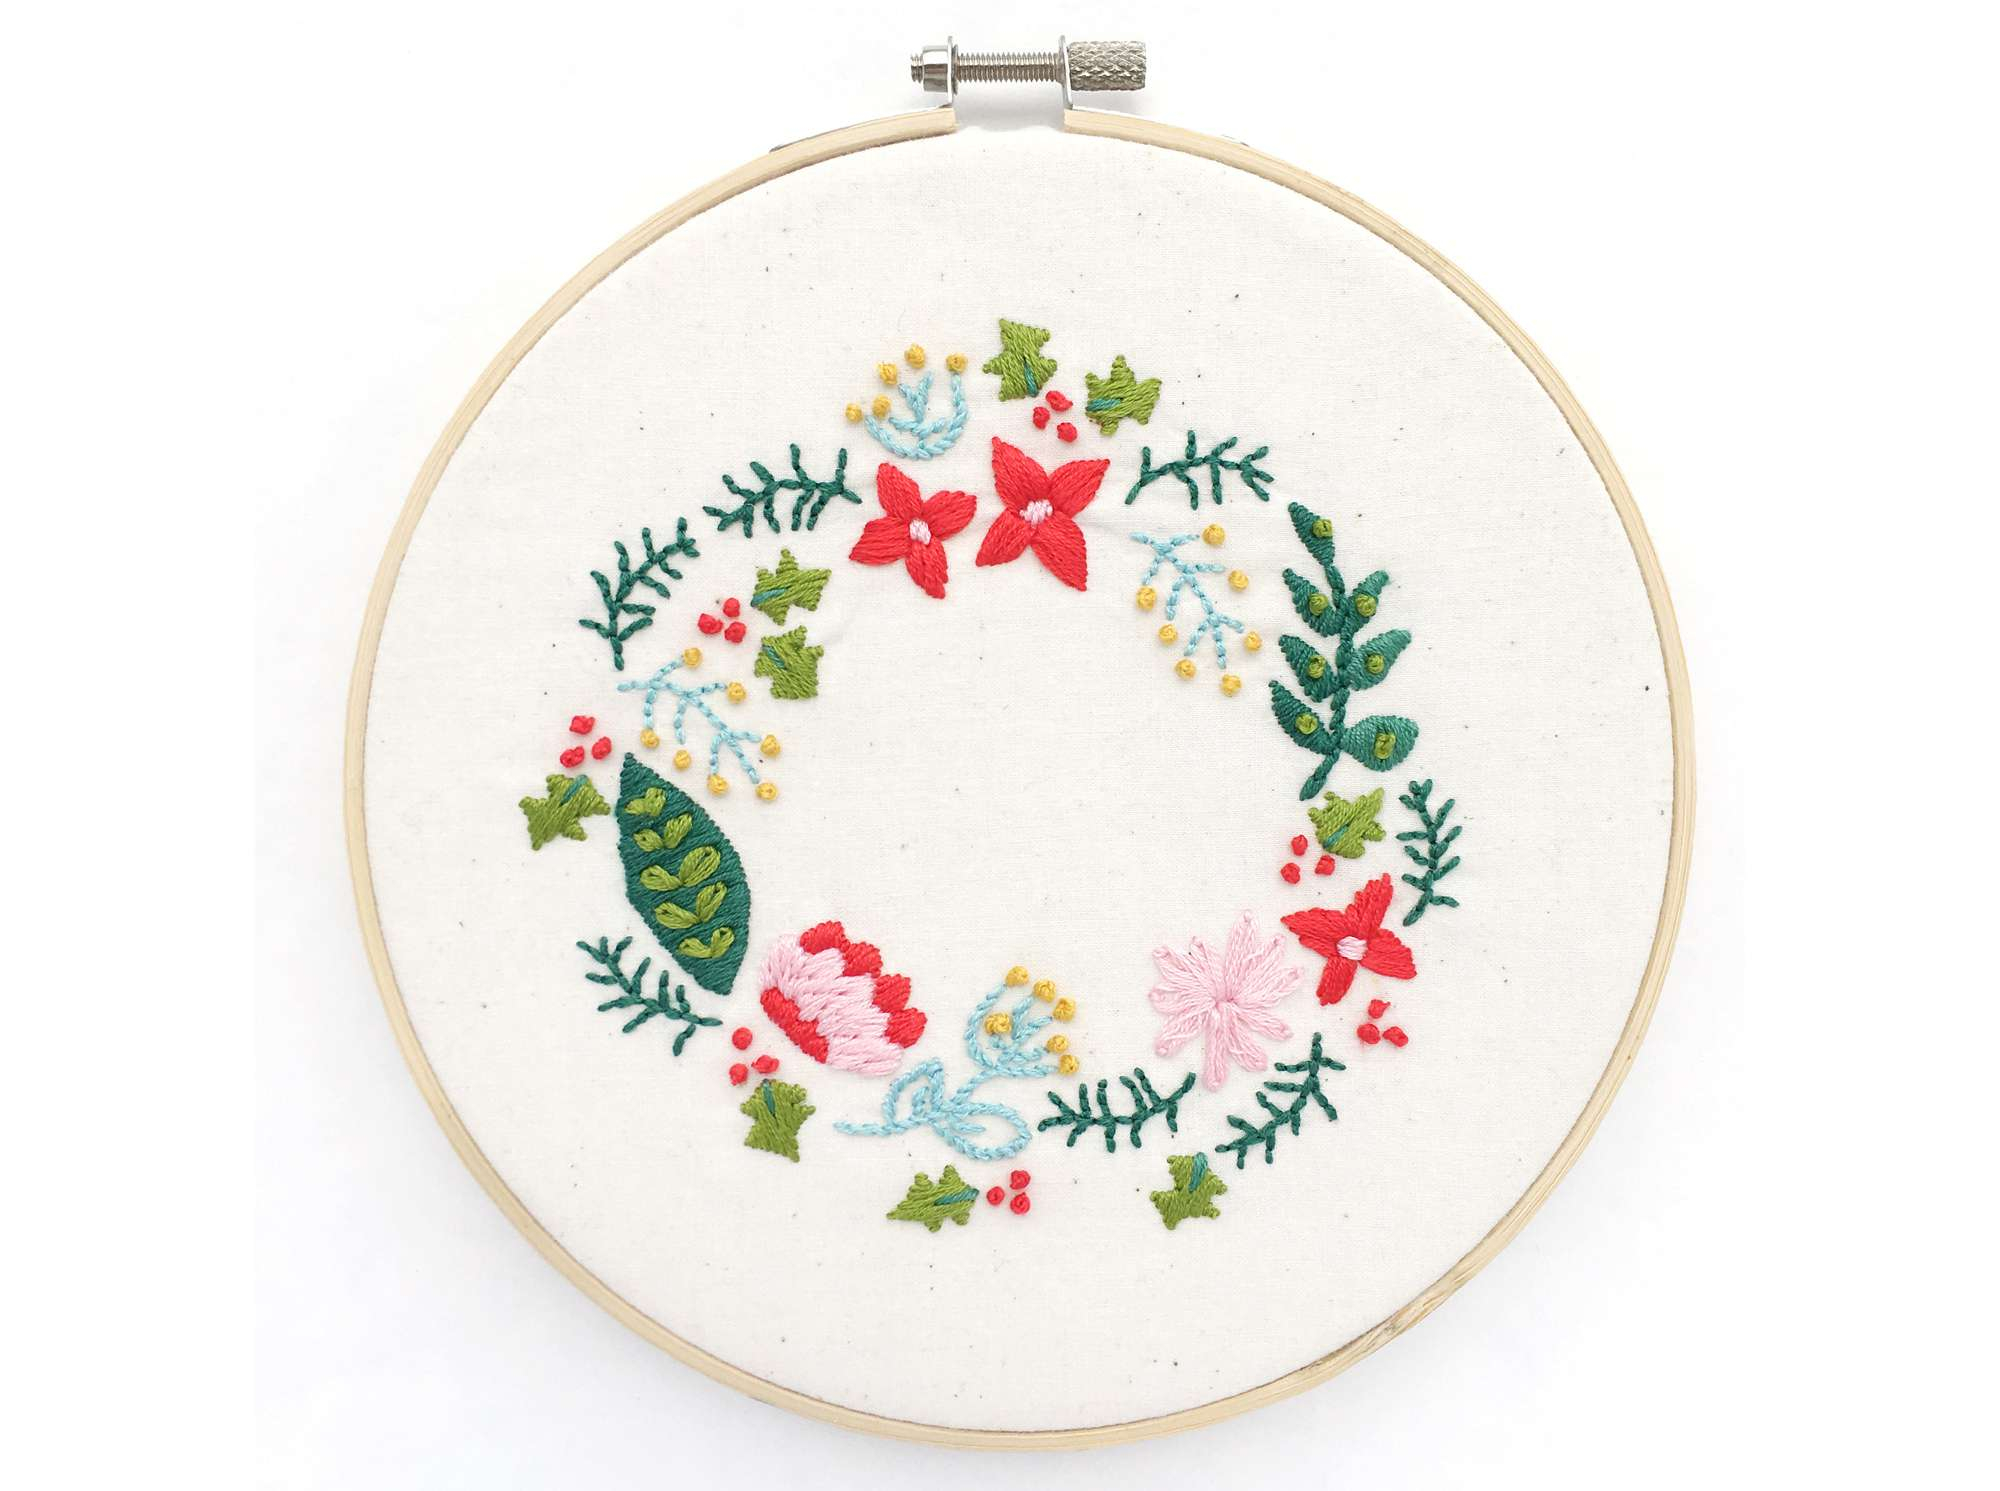 Christmas Hand Embroidery Patterns 10 Wreath Embroidery Patterns For Any Time Of Year